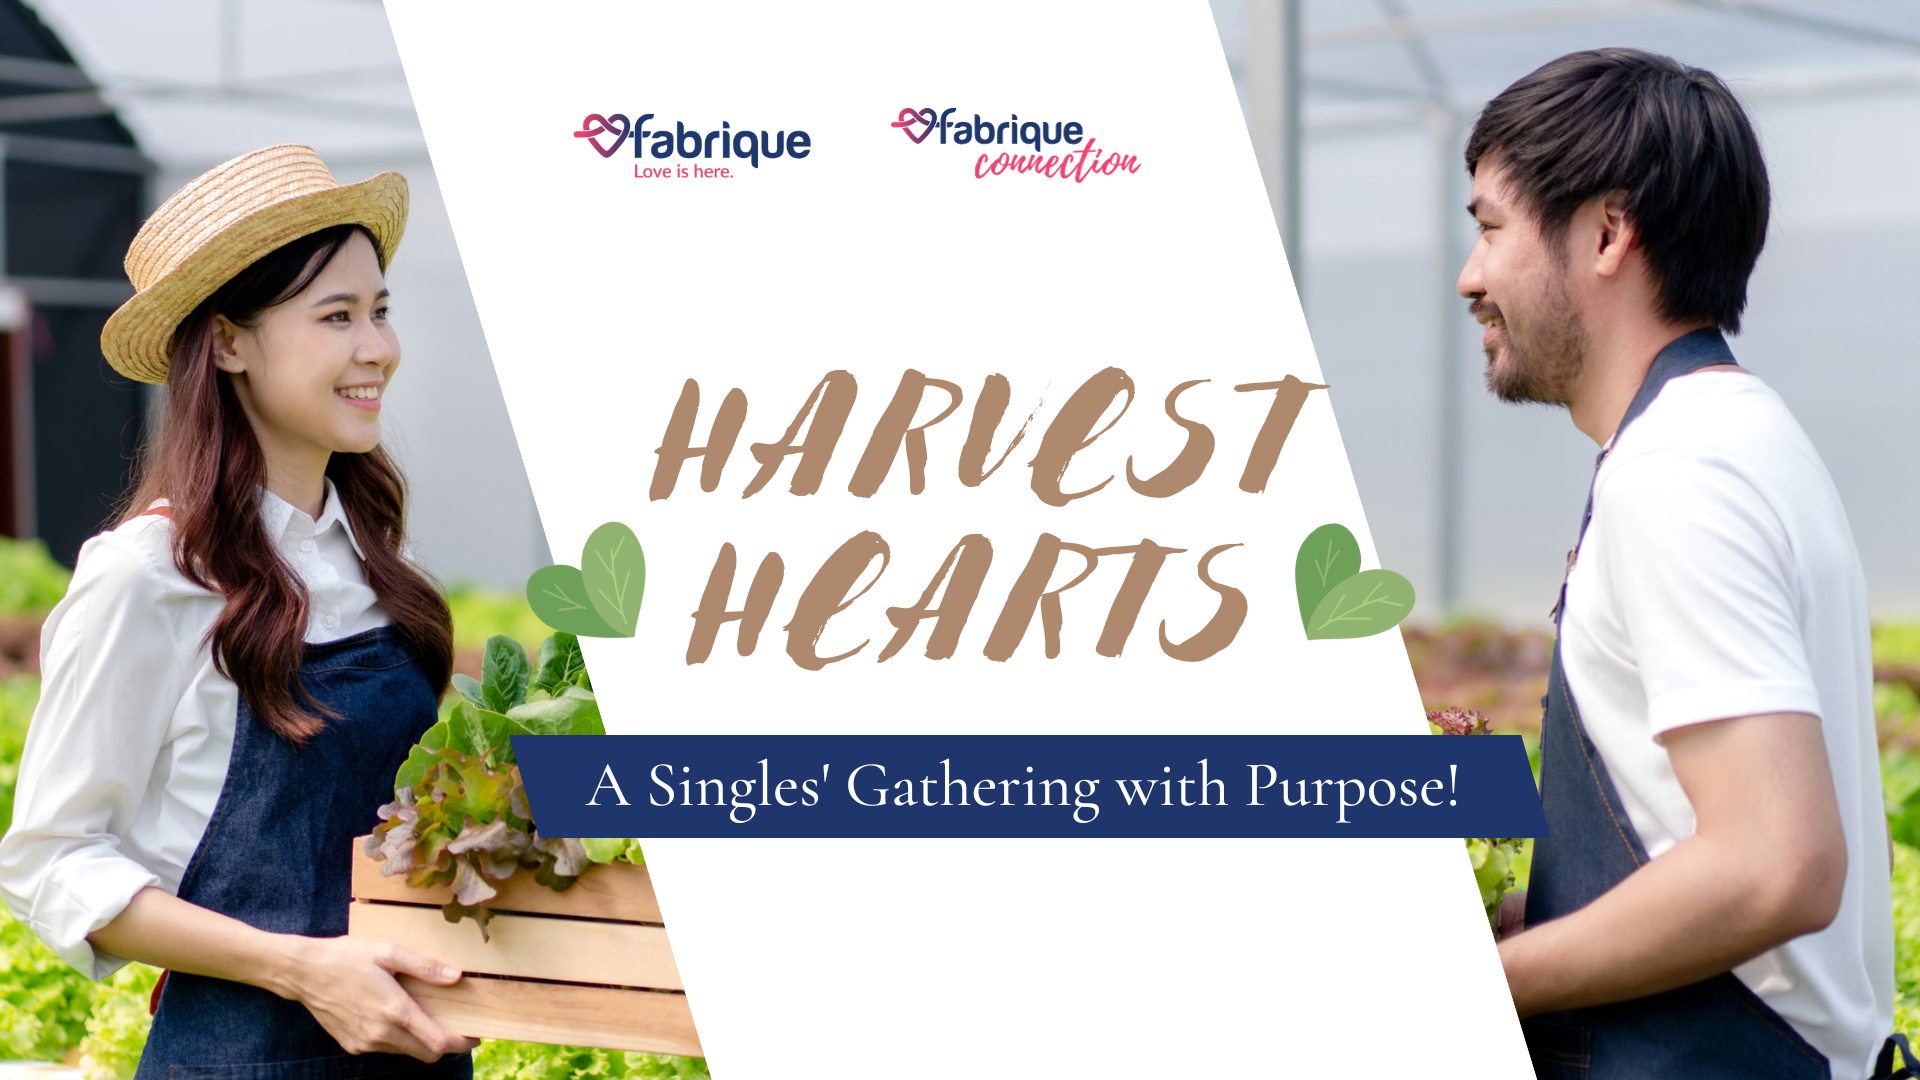 You are currently viewing Harvest Hearts: A Singles’ Gathering with Purpose!